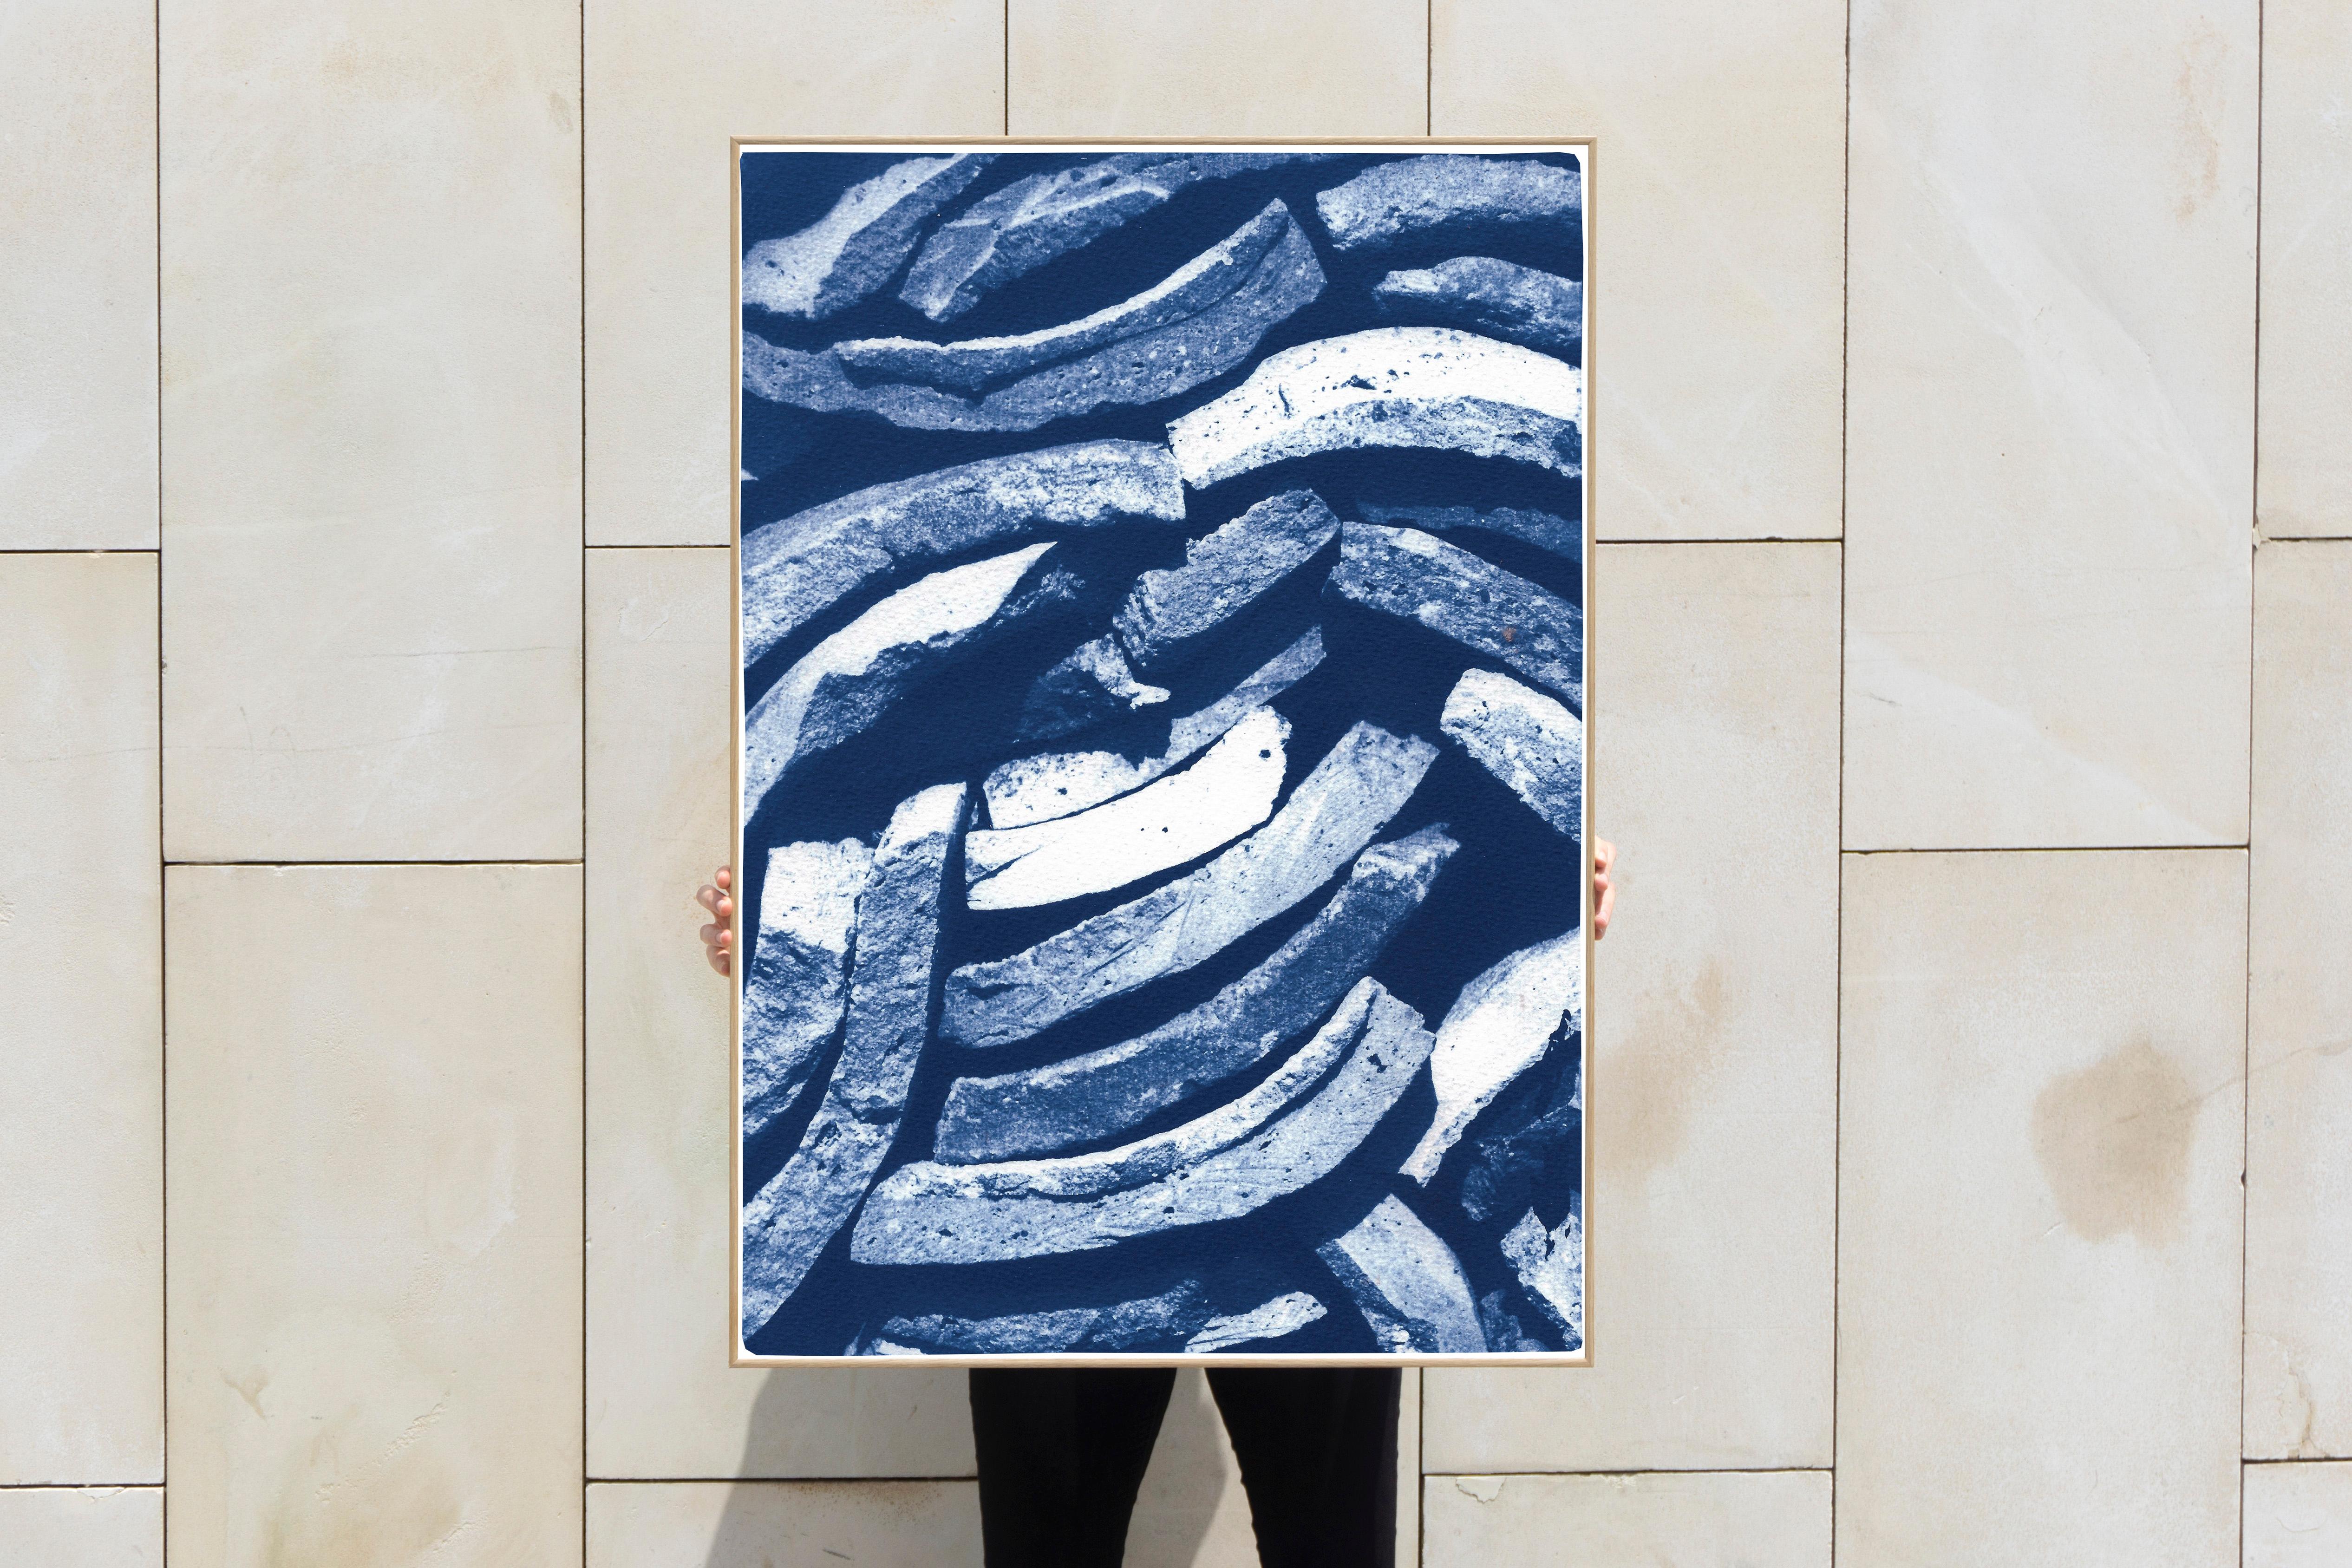 This is an exclusive handprinted limited edition cyanotype of stacked curved tiles in blue tones. 

Details:
+ Title: Stacked Curved Tiles
+ Year: 2021
+ Edition Size: 100
+ Stamped and Certificate of Authenticity provided
+ Measurements : 70x100 cm